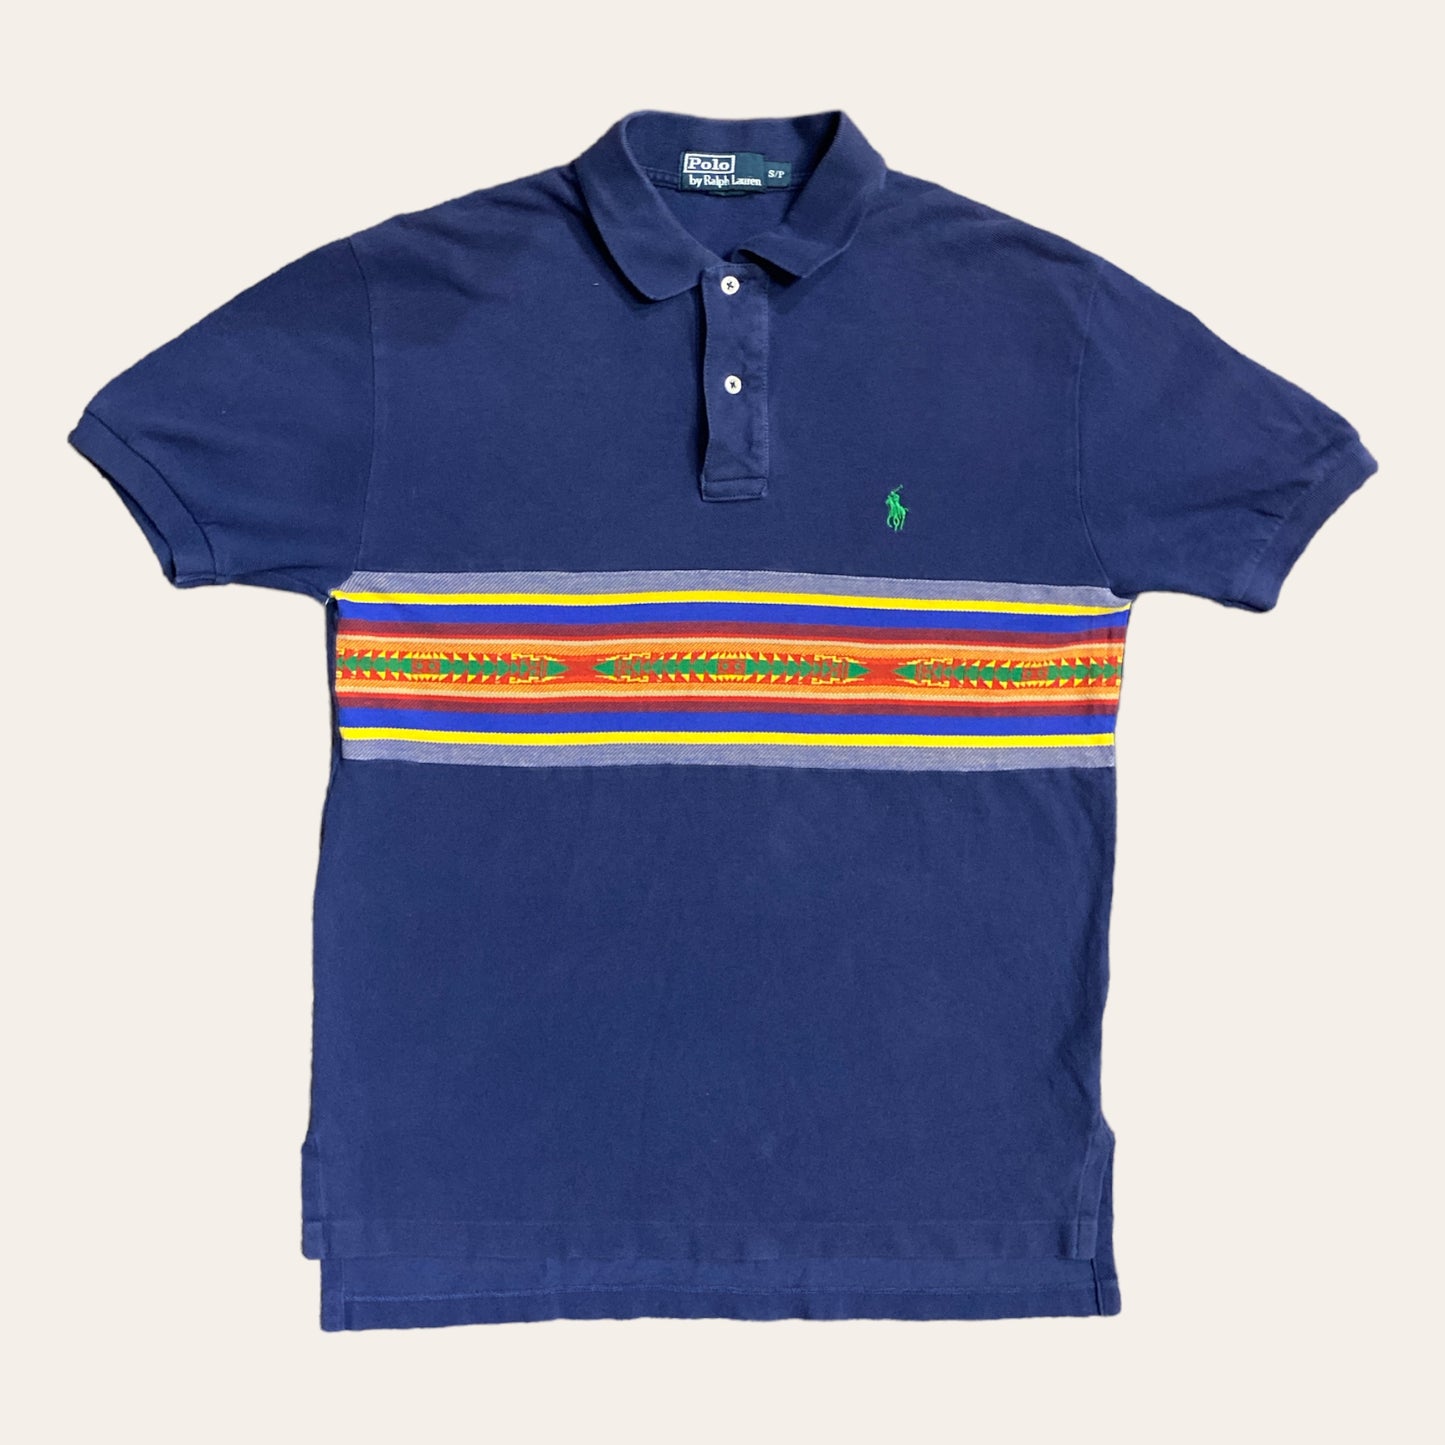 Polo by Ralph Lauren Collared Tee Size S